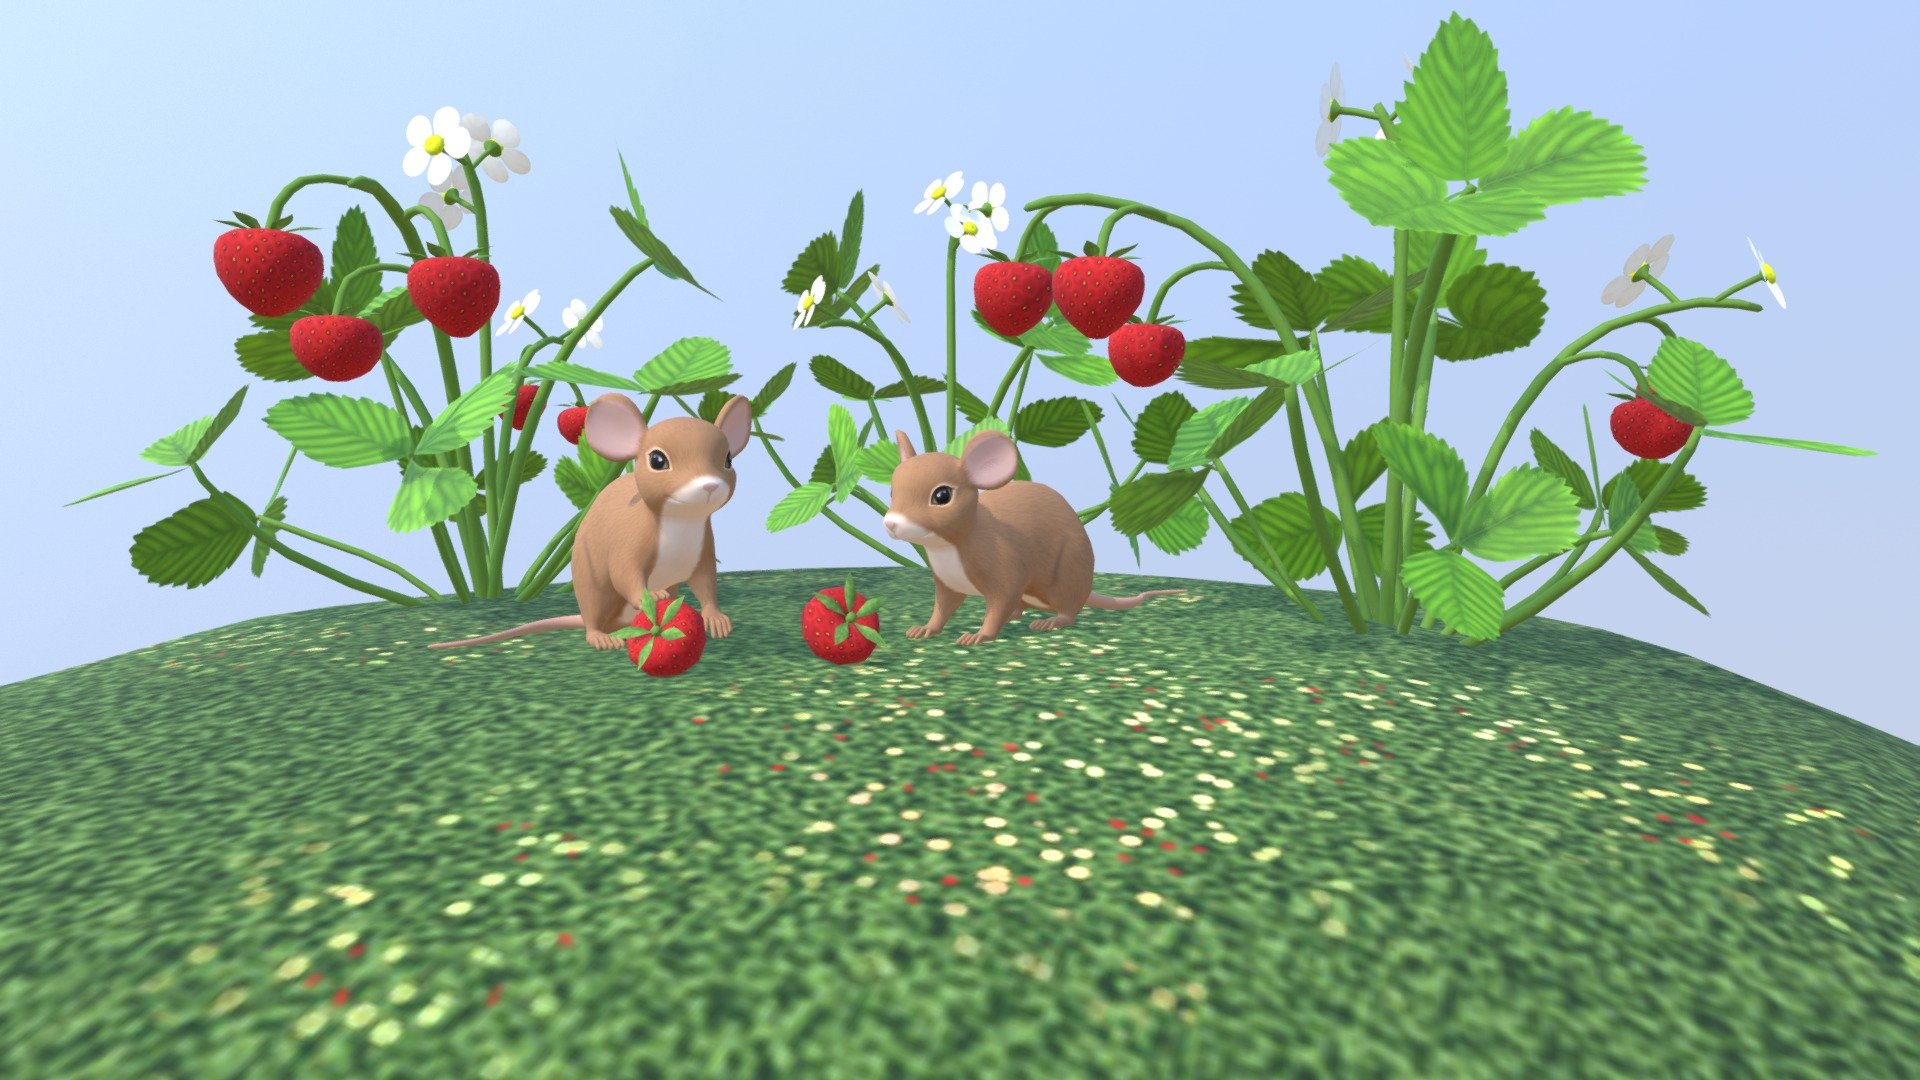 2 mice in a strawberry field.Hand painted textures 3d model